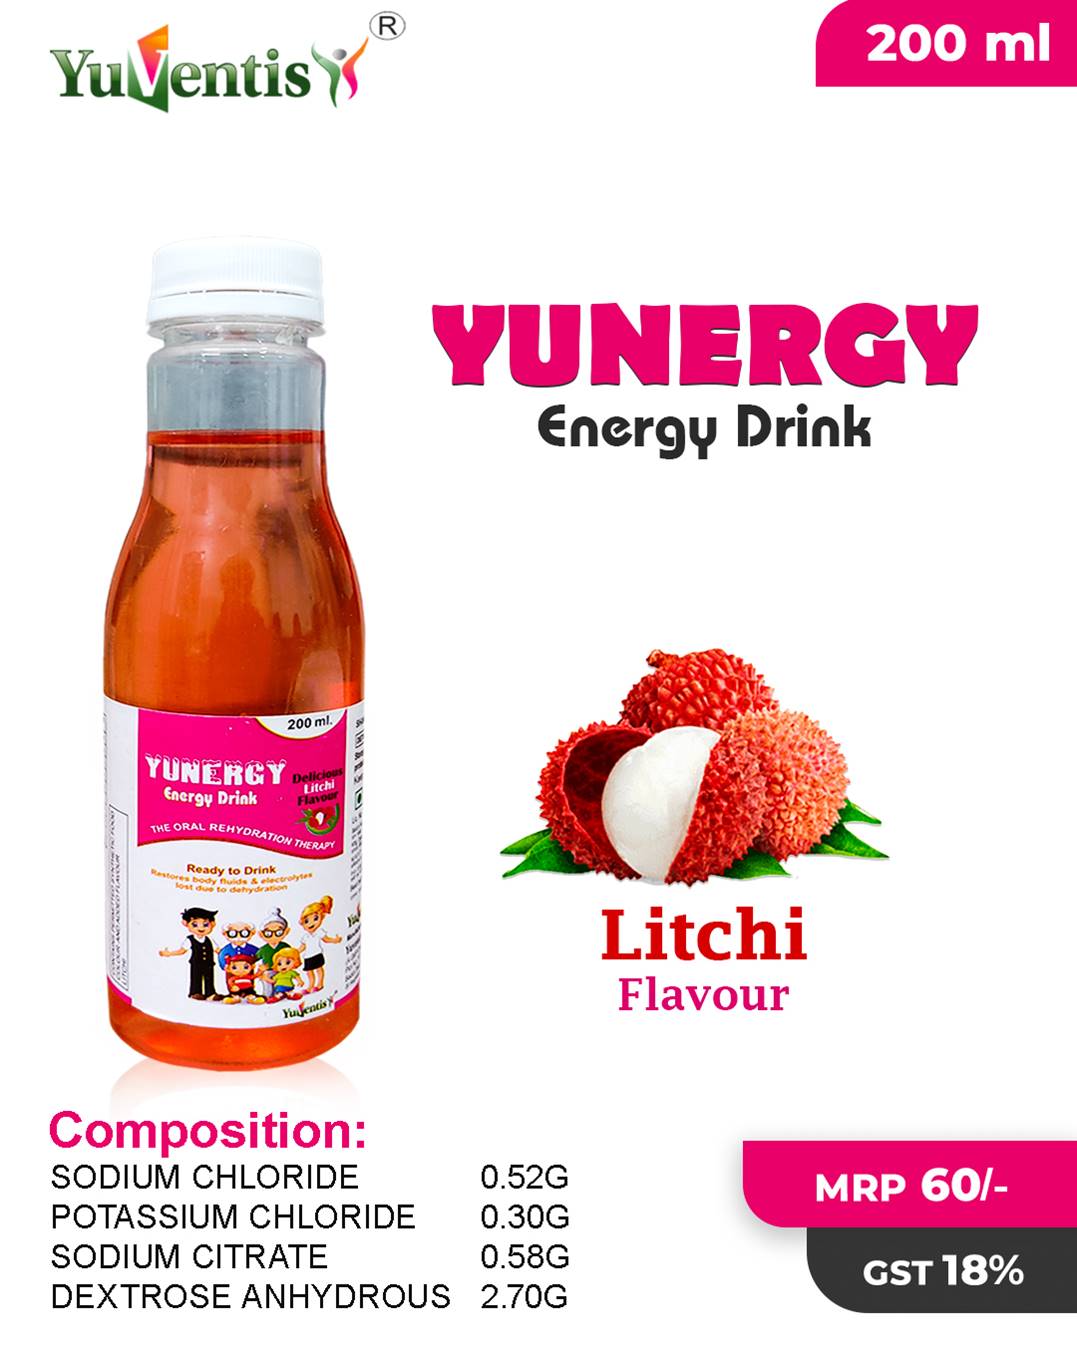 YUNERGY ENERGY DRINK IN LITCHI